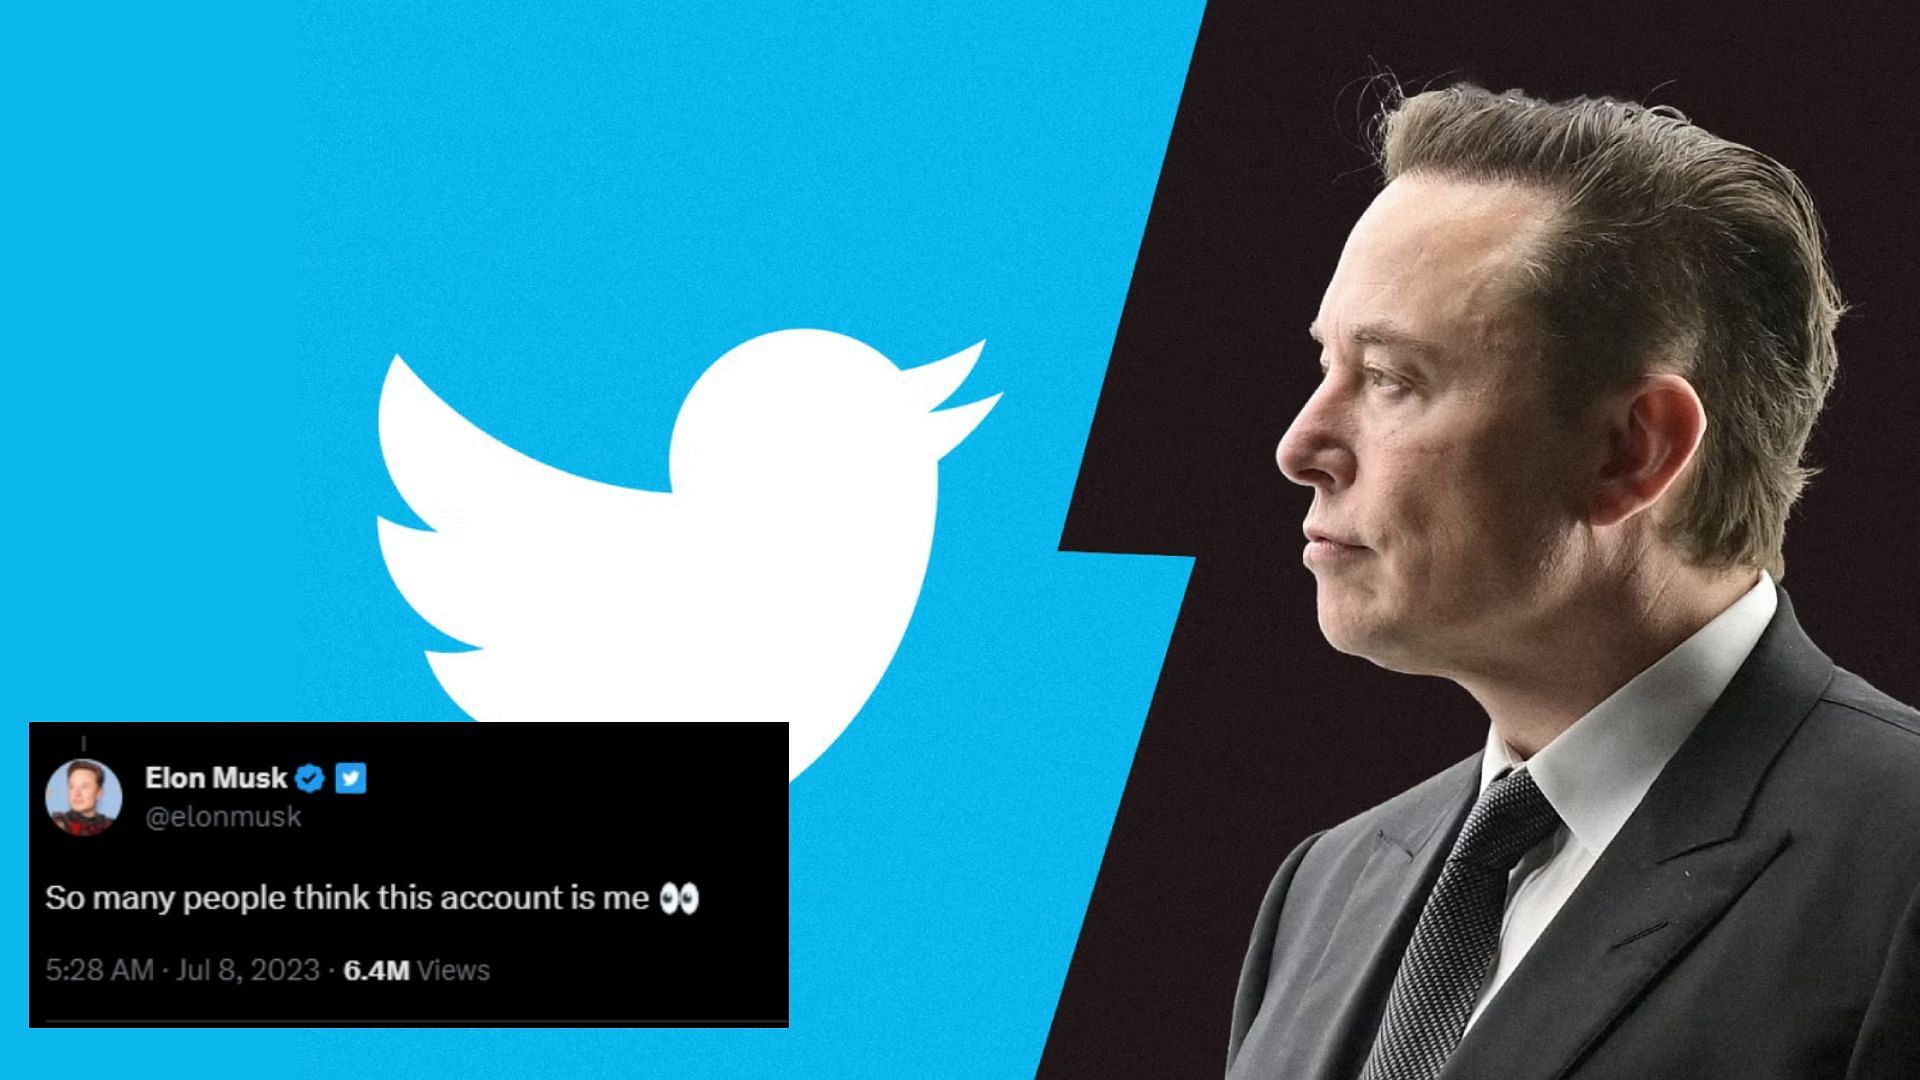 Elon Musk with the Twitter logo and his tweet